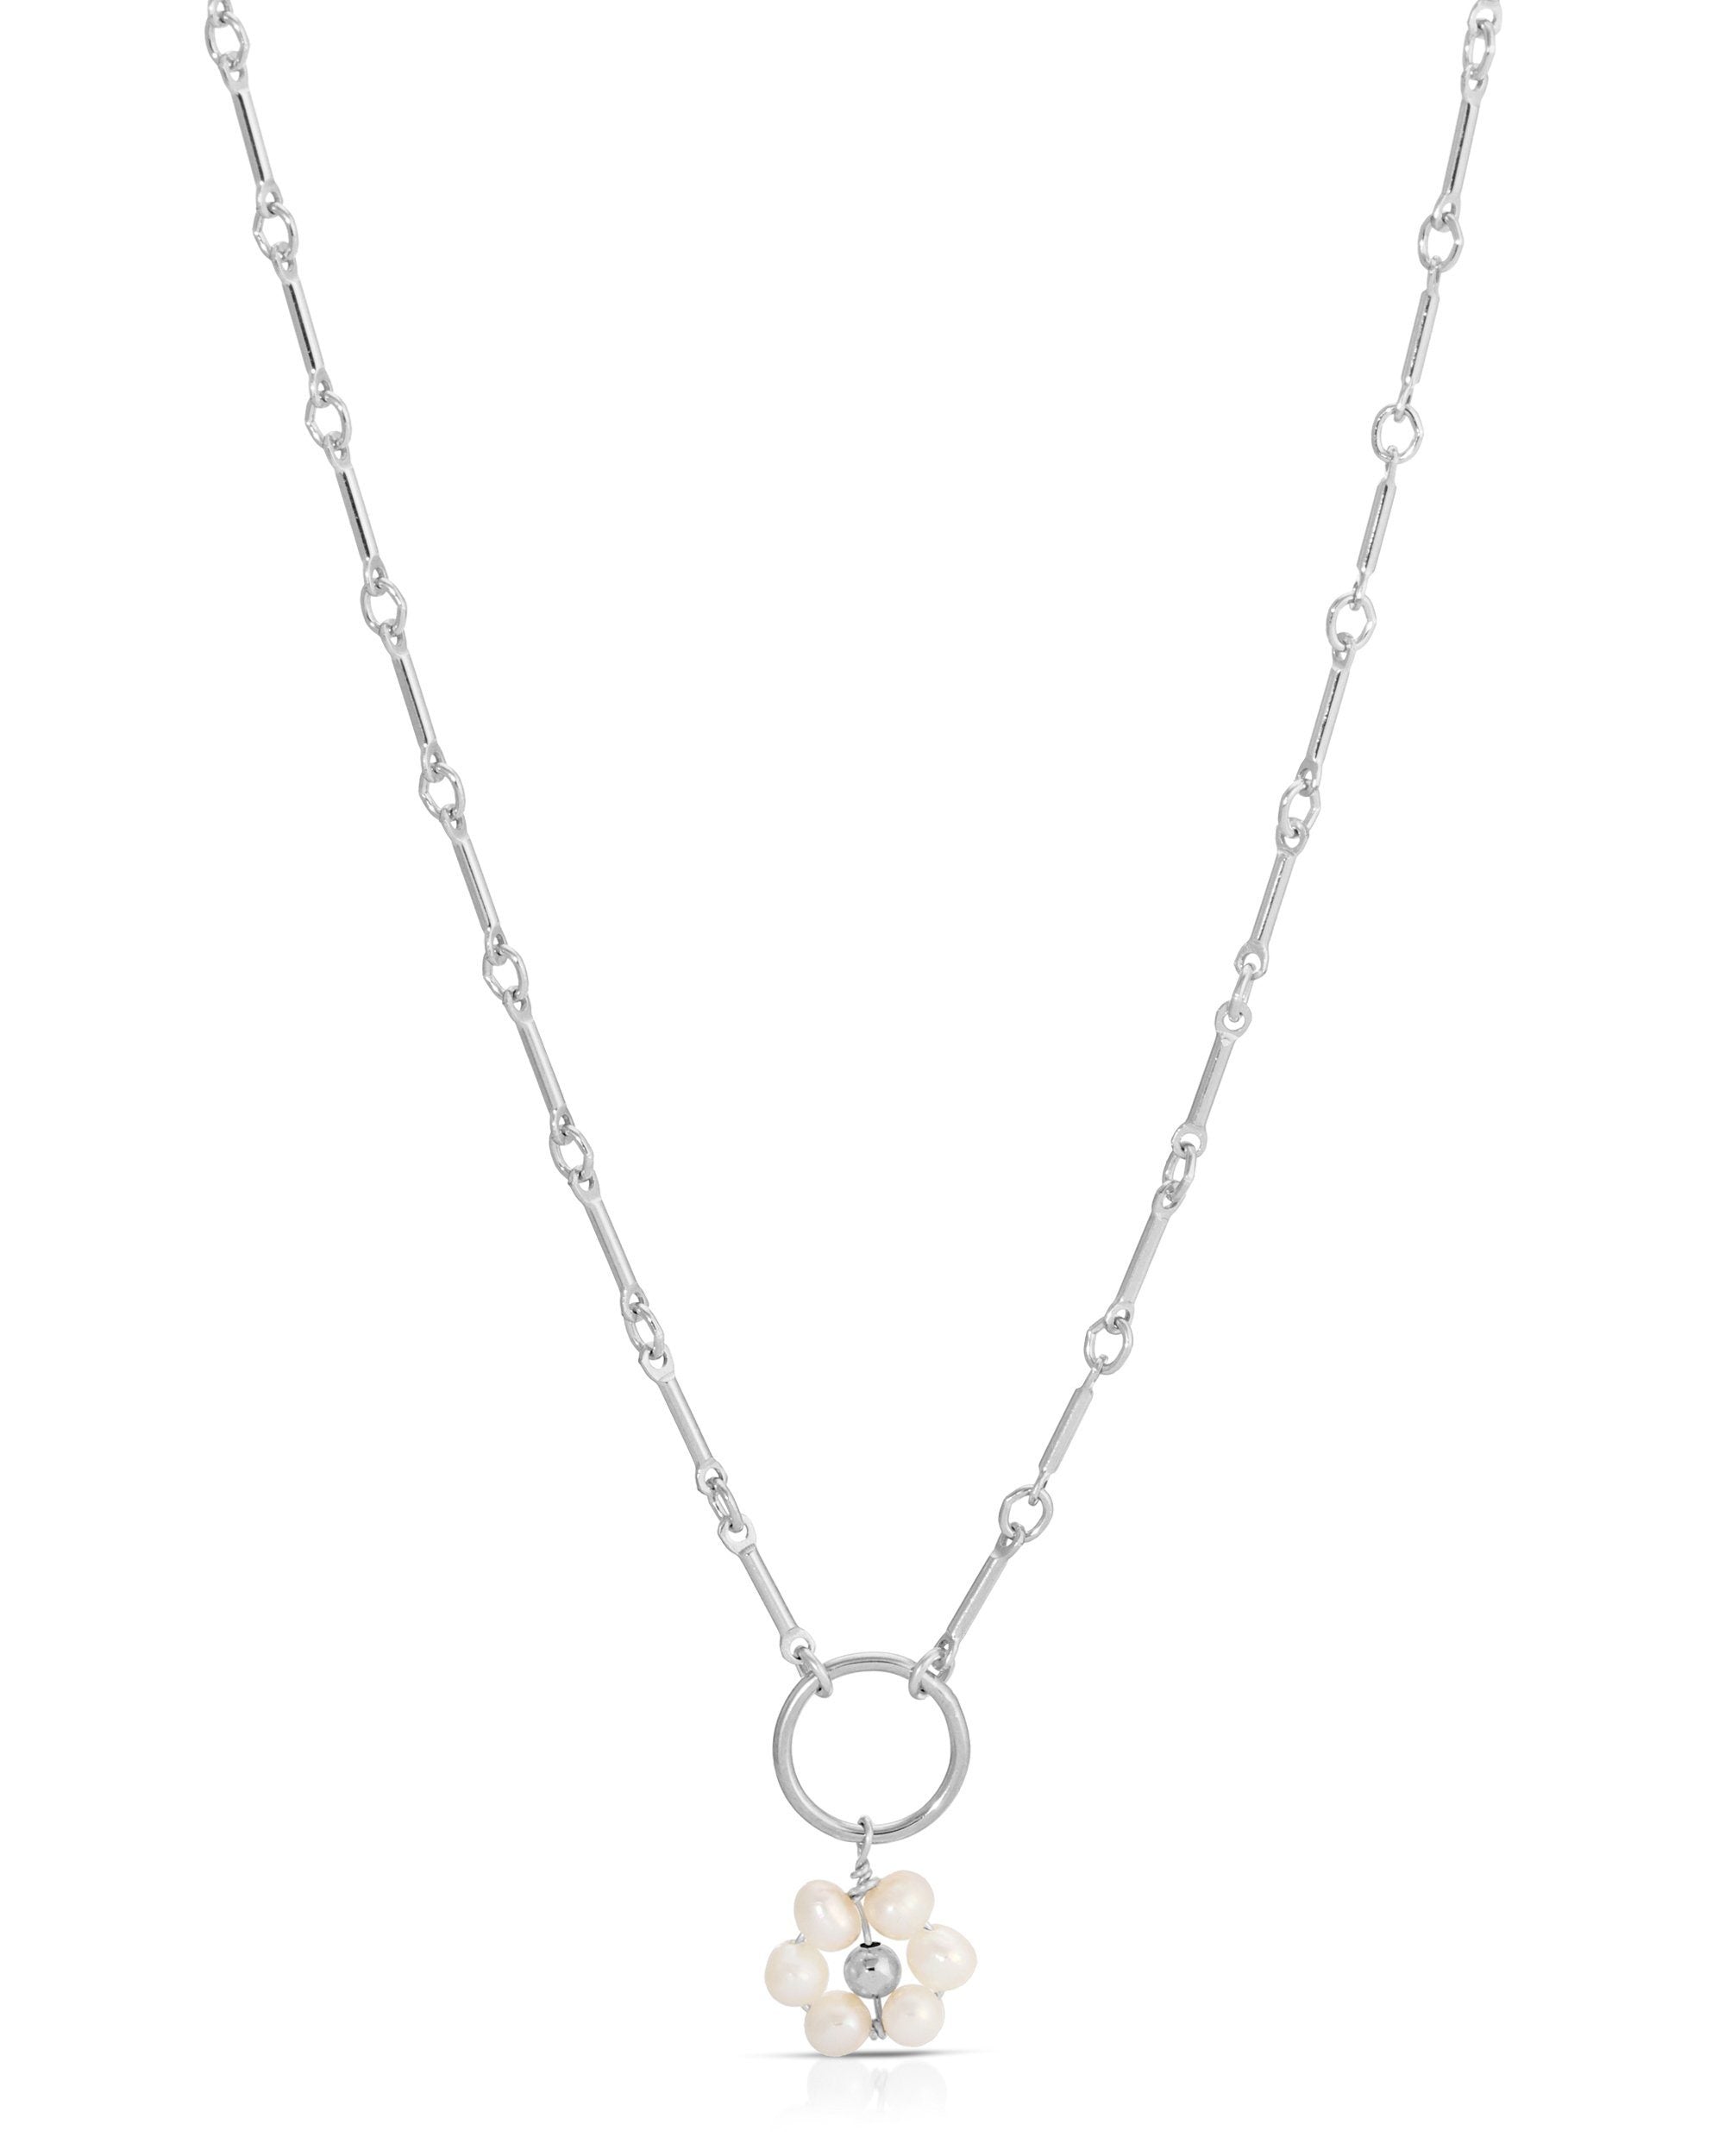 Flor Del Sol Necklace by KOZAKH. A 16 to 18 inch adjustable length necklace in Sterling Silver, featuring 3mm Freshwater Pearls in form of a daisy.